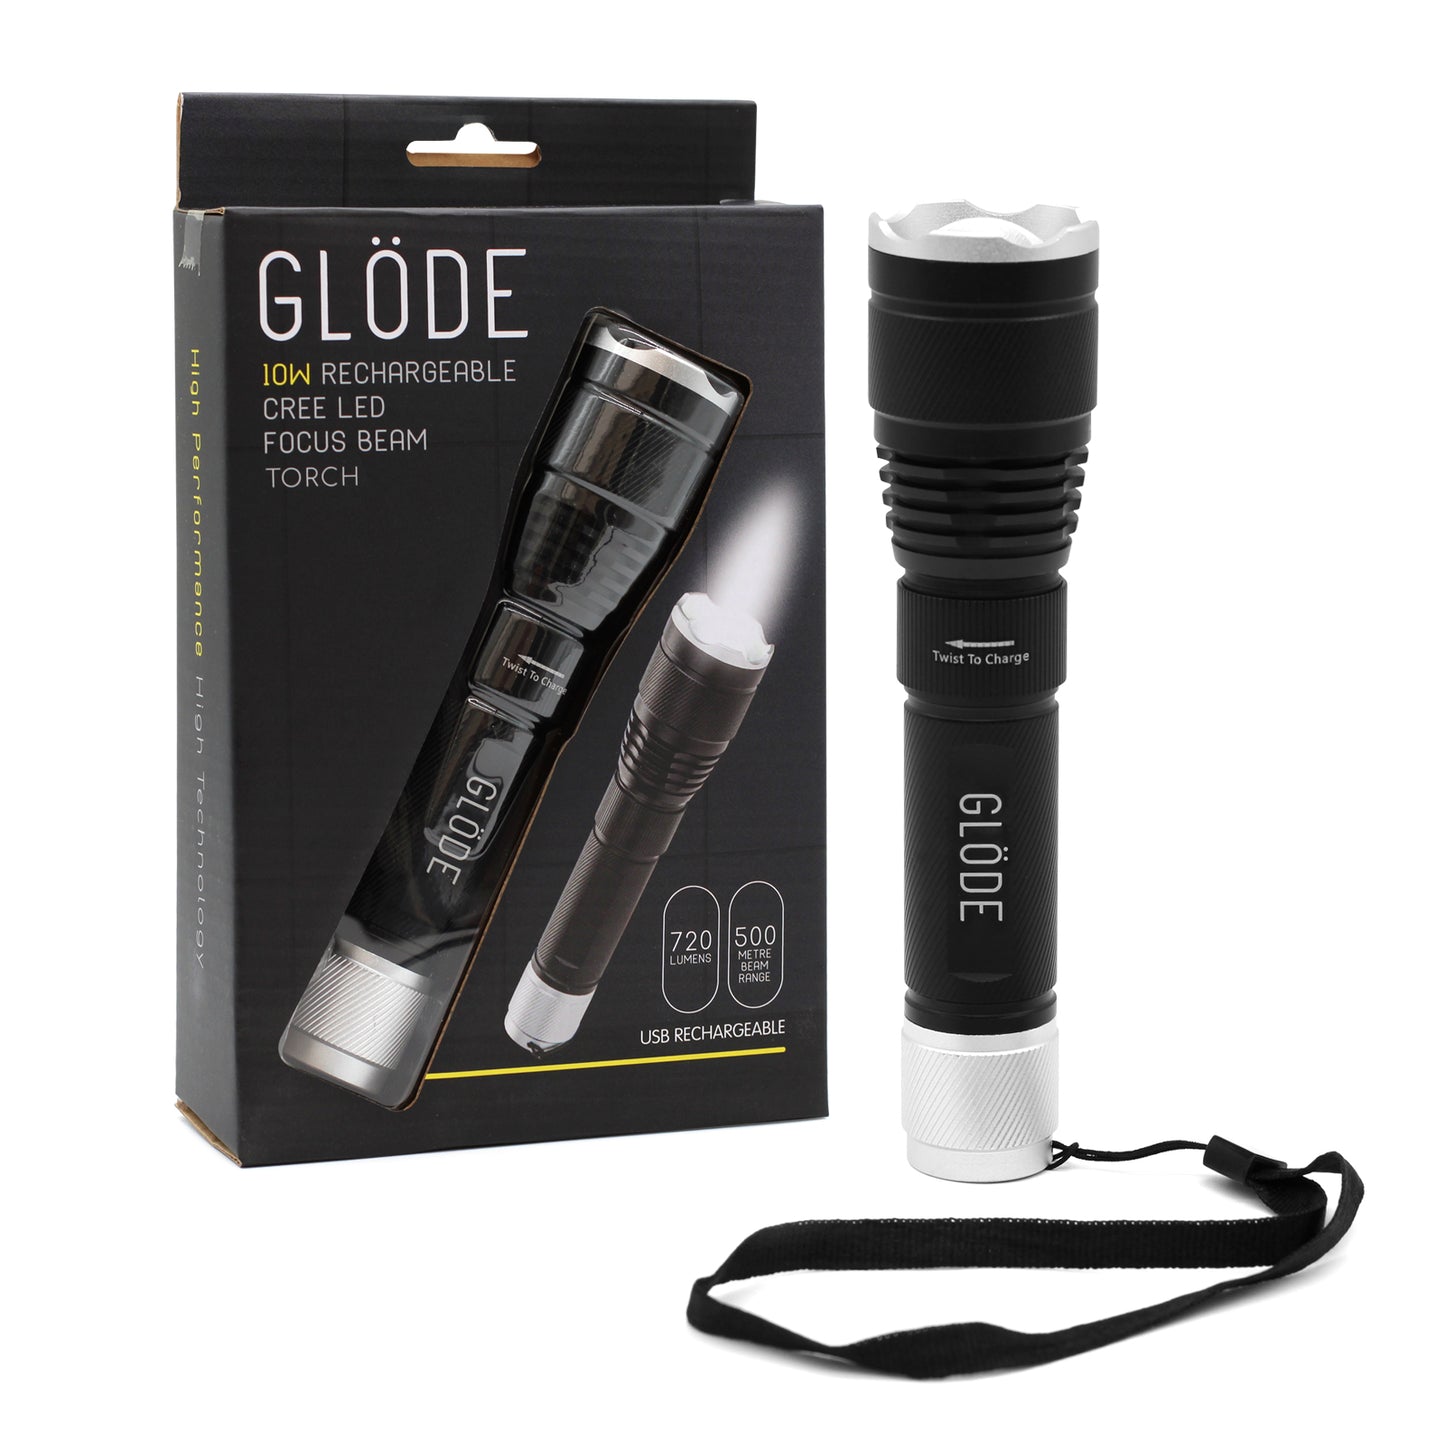 Glode Flashlight Rechargeable Cree LED Focus Beam Torch and Box